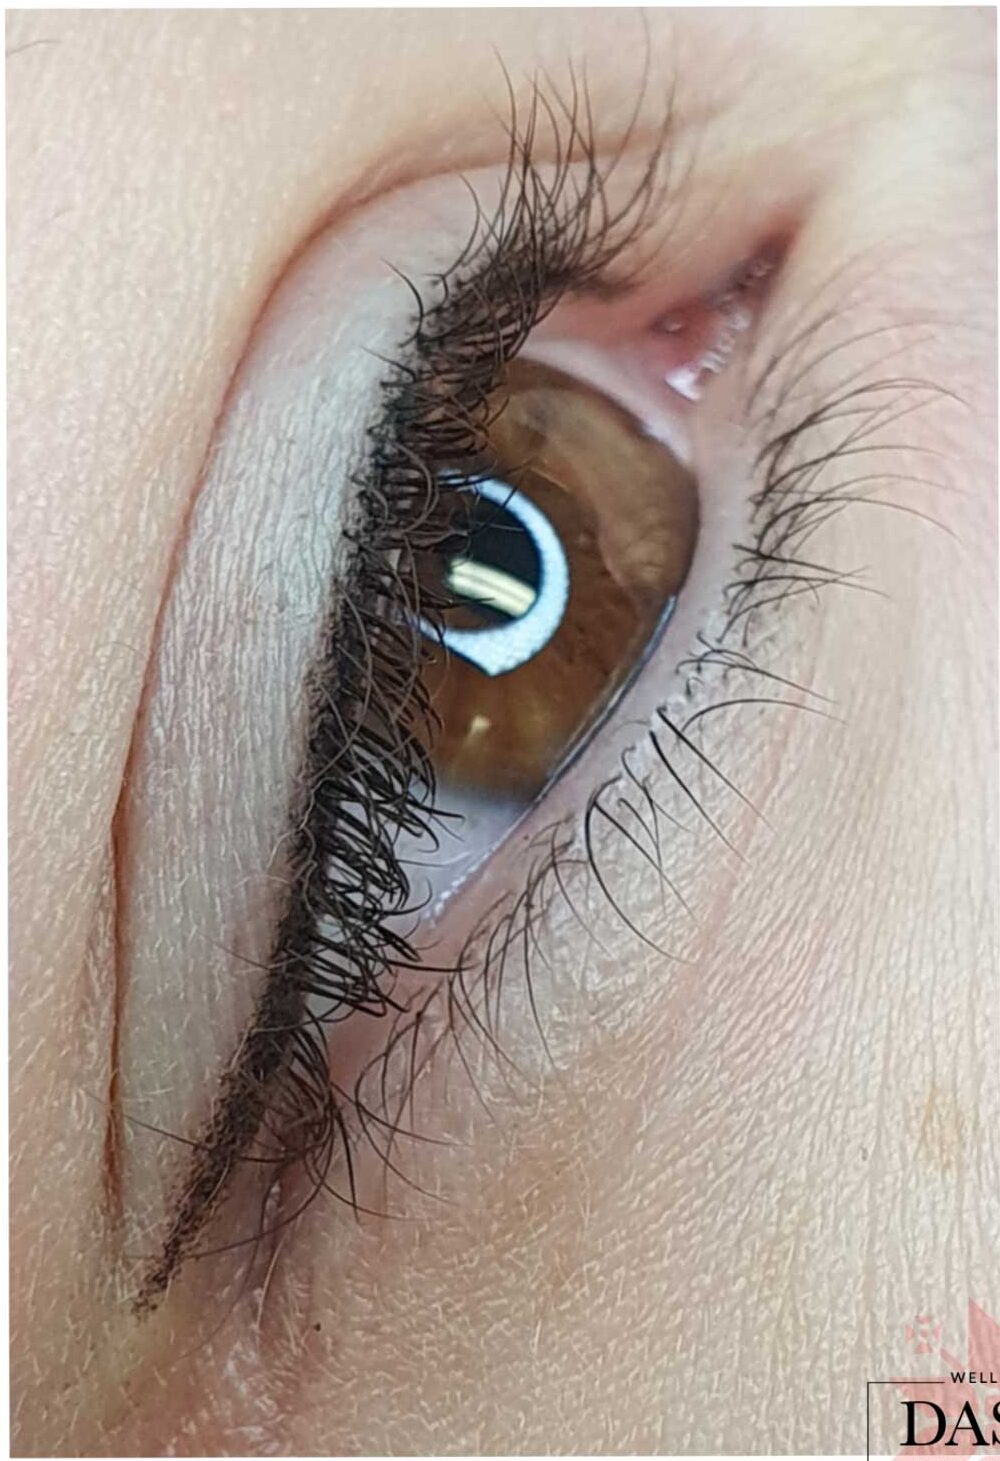 Eyeliner Cosmetic Tattoo. Cosmetic and Mediical Tattoo by Dasha. Permanent makeup and reconstructive tattoo, scalp micro-pigmentation in Christchurch, New Zealand